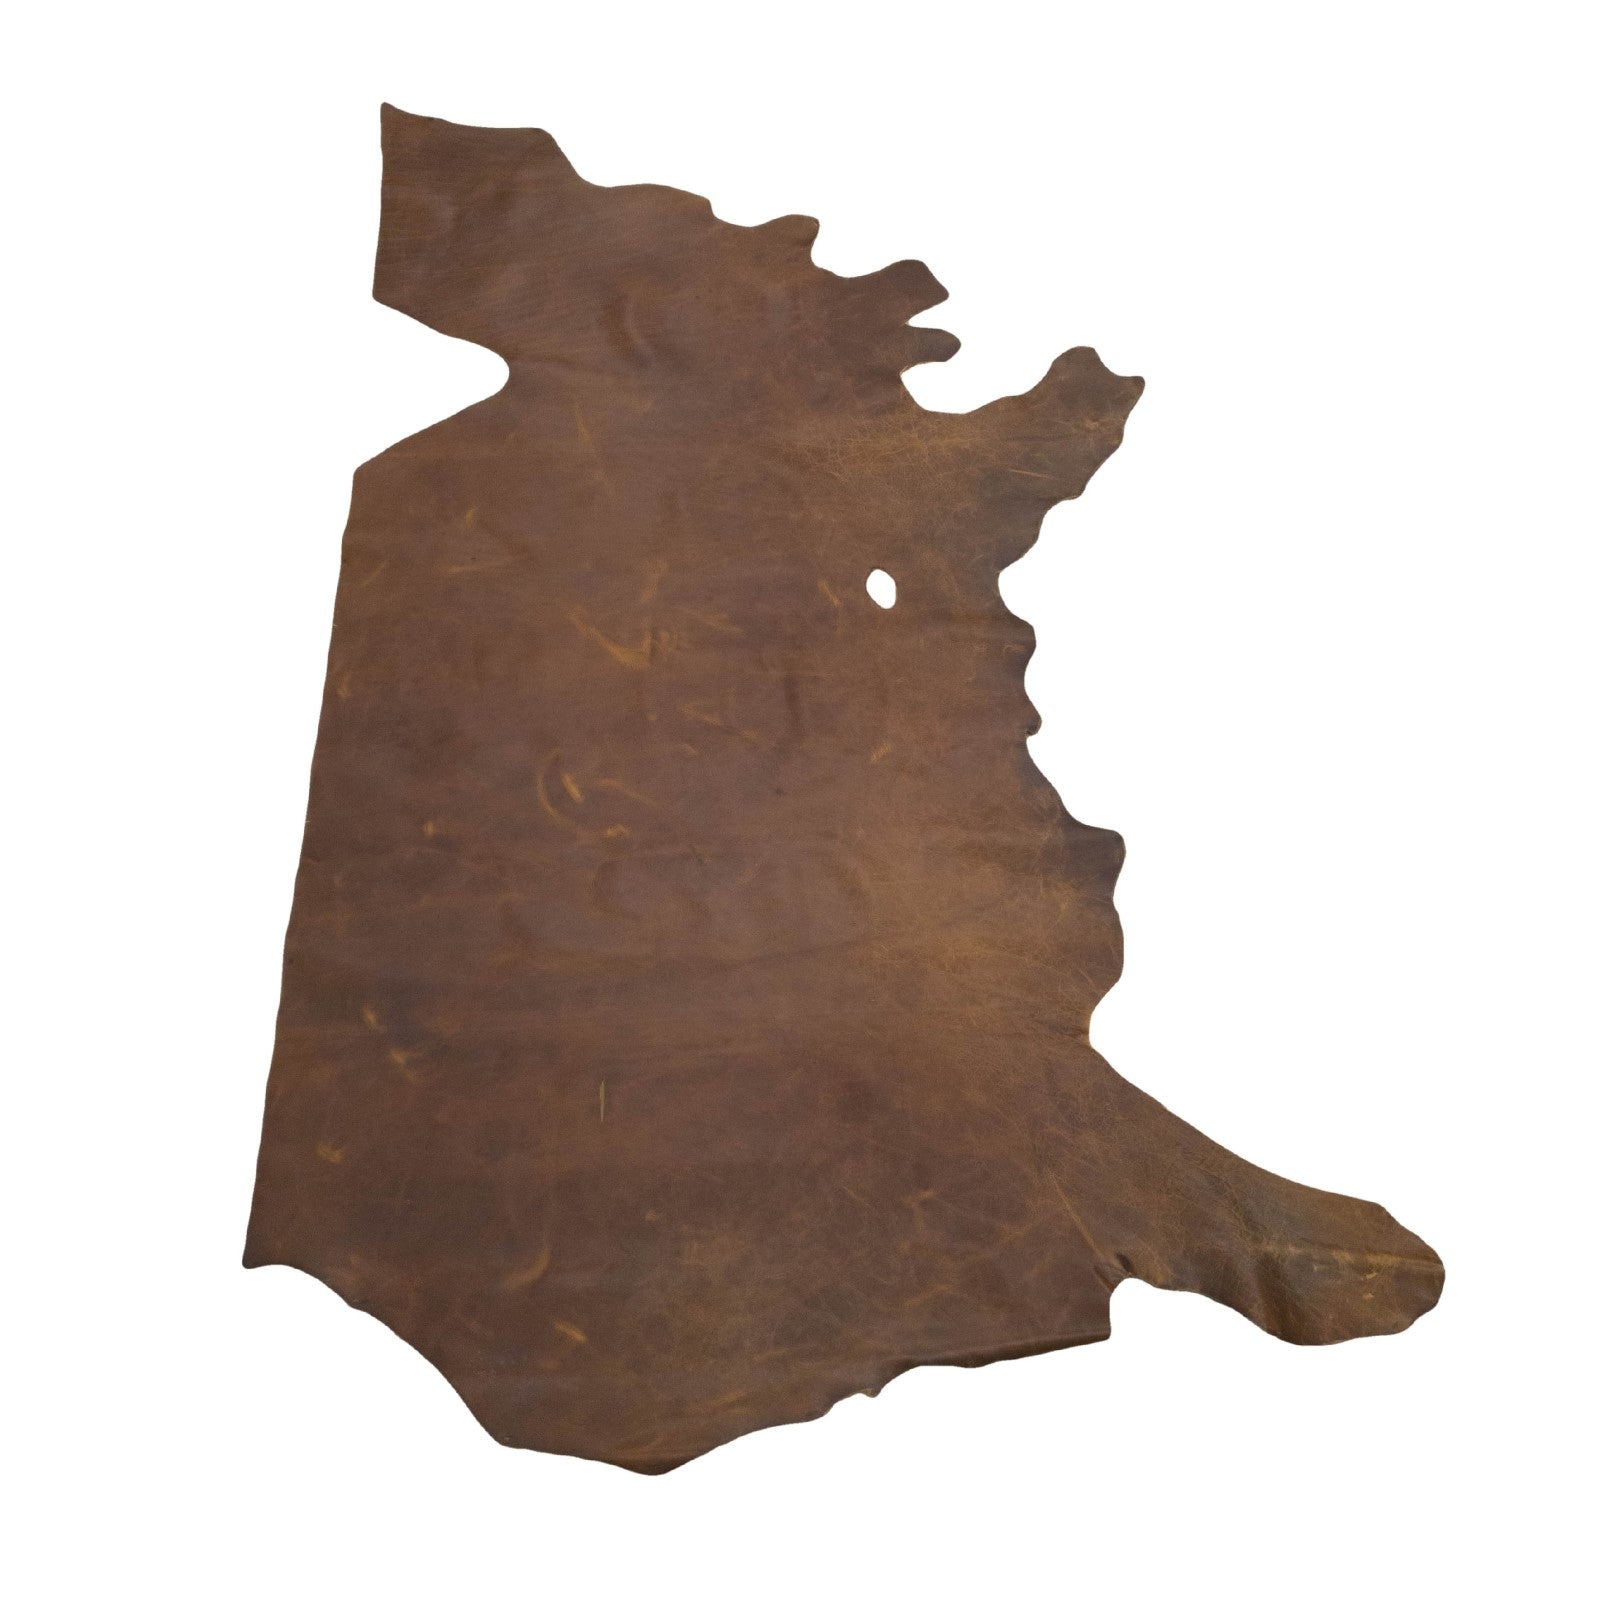 Tan, 4-5 oz, 18-29 Sq Ft, Chap Cow Side, 21-23 / Low Grade | The Leather Guy